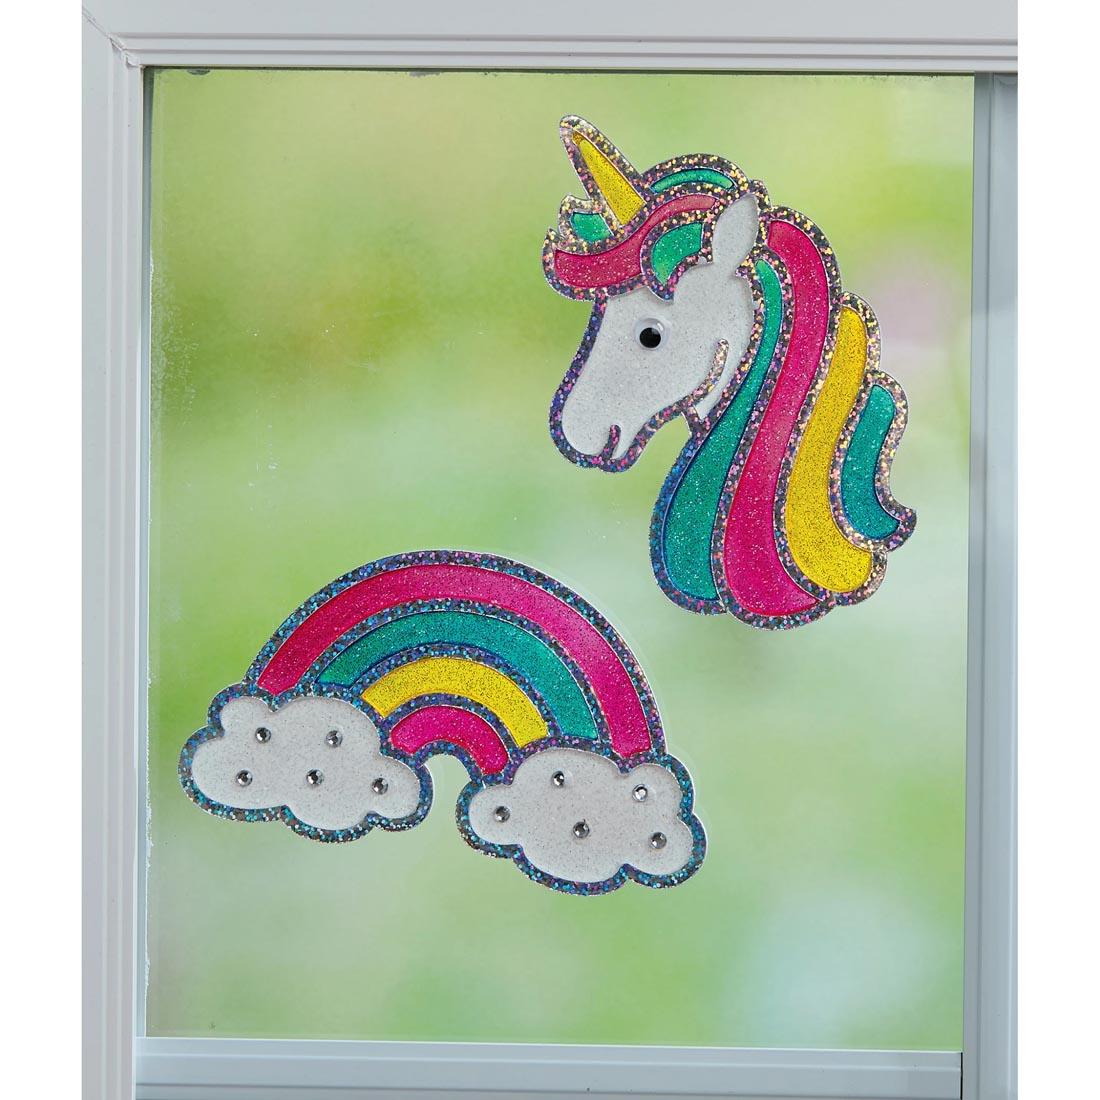 Samples of completed Magical Window Art By Creativity For Kids